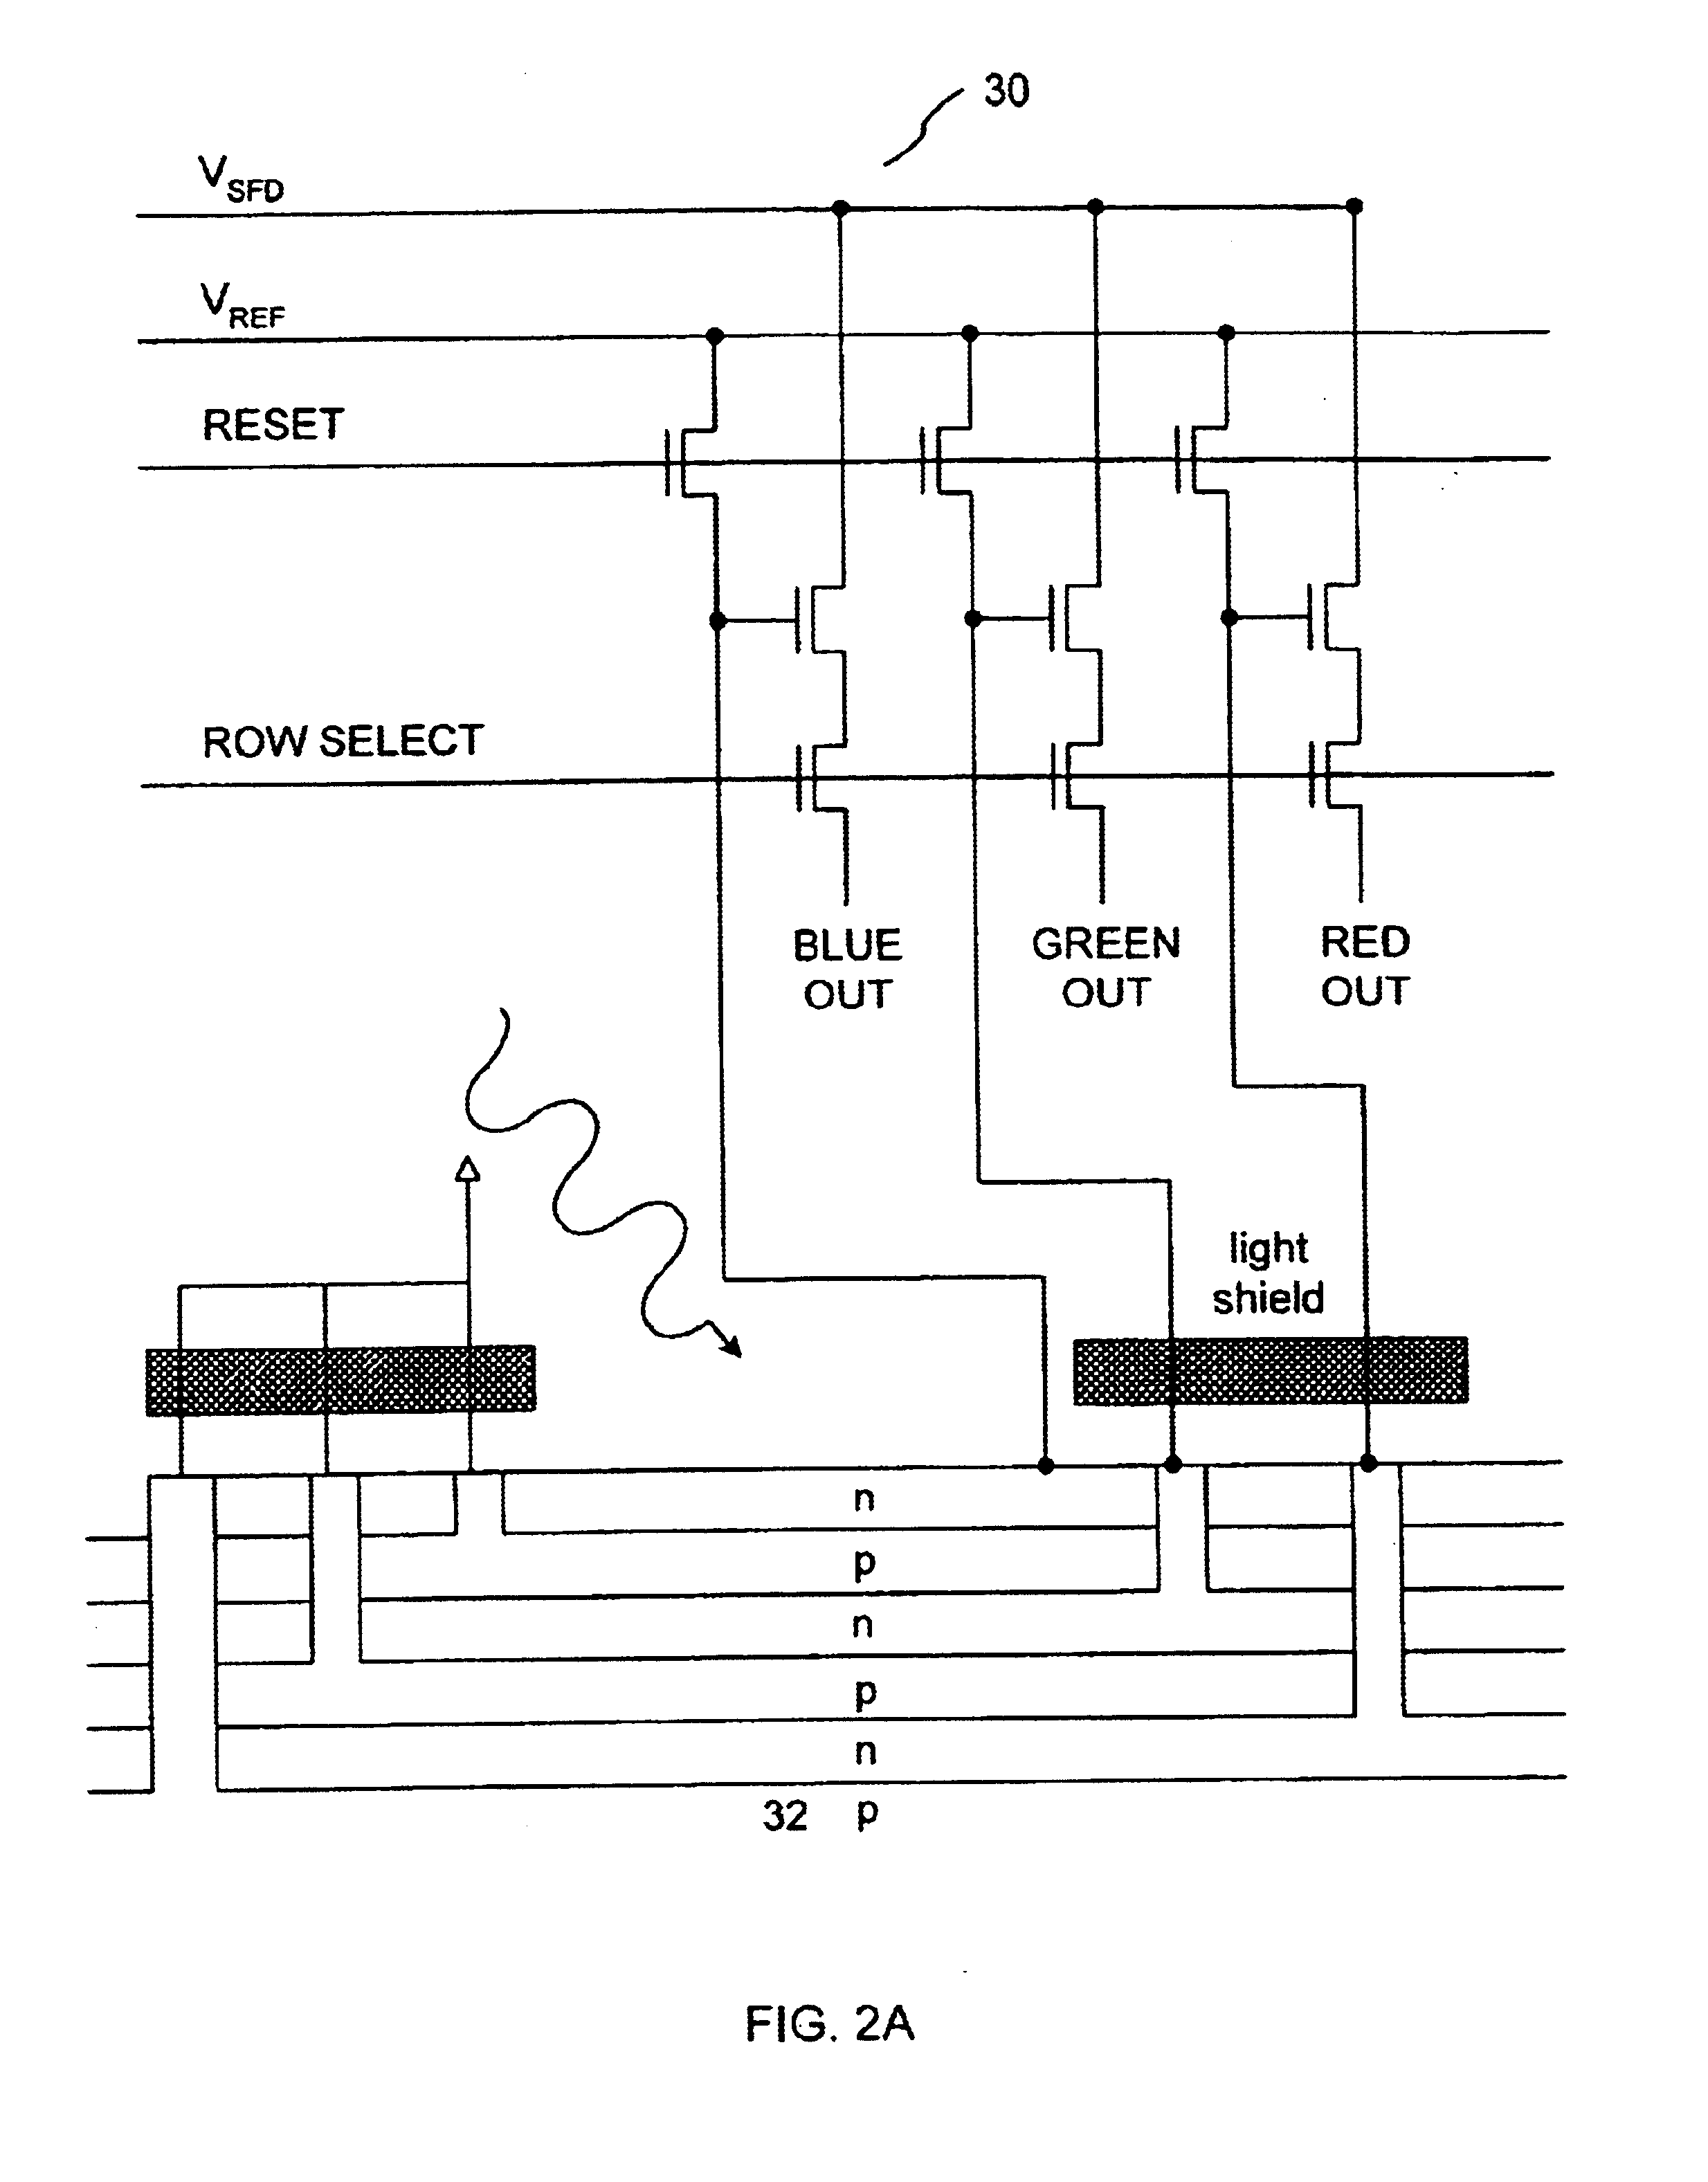 Vertical color filter detector group and array